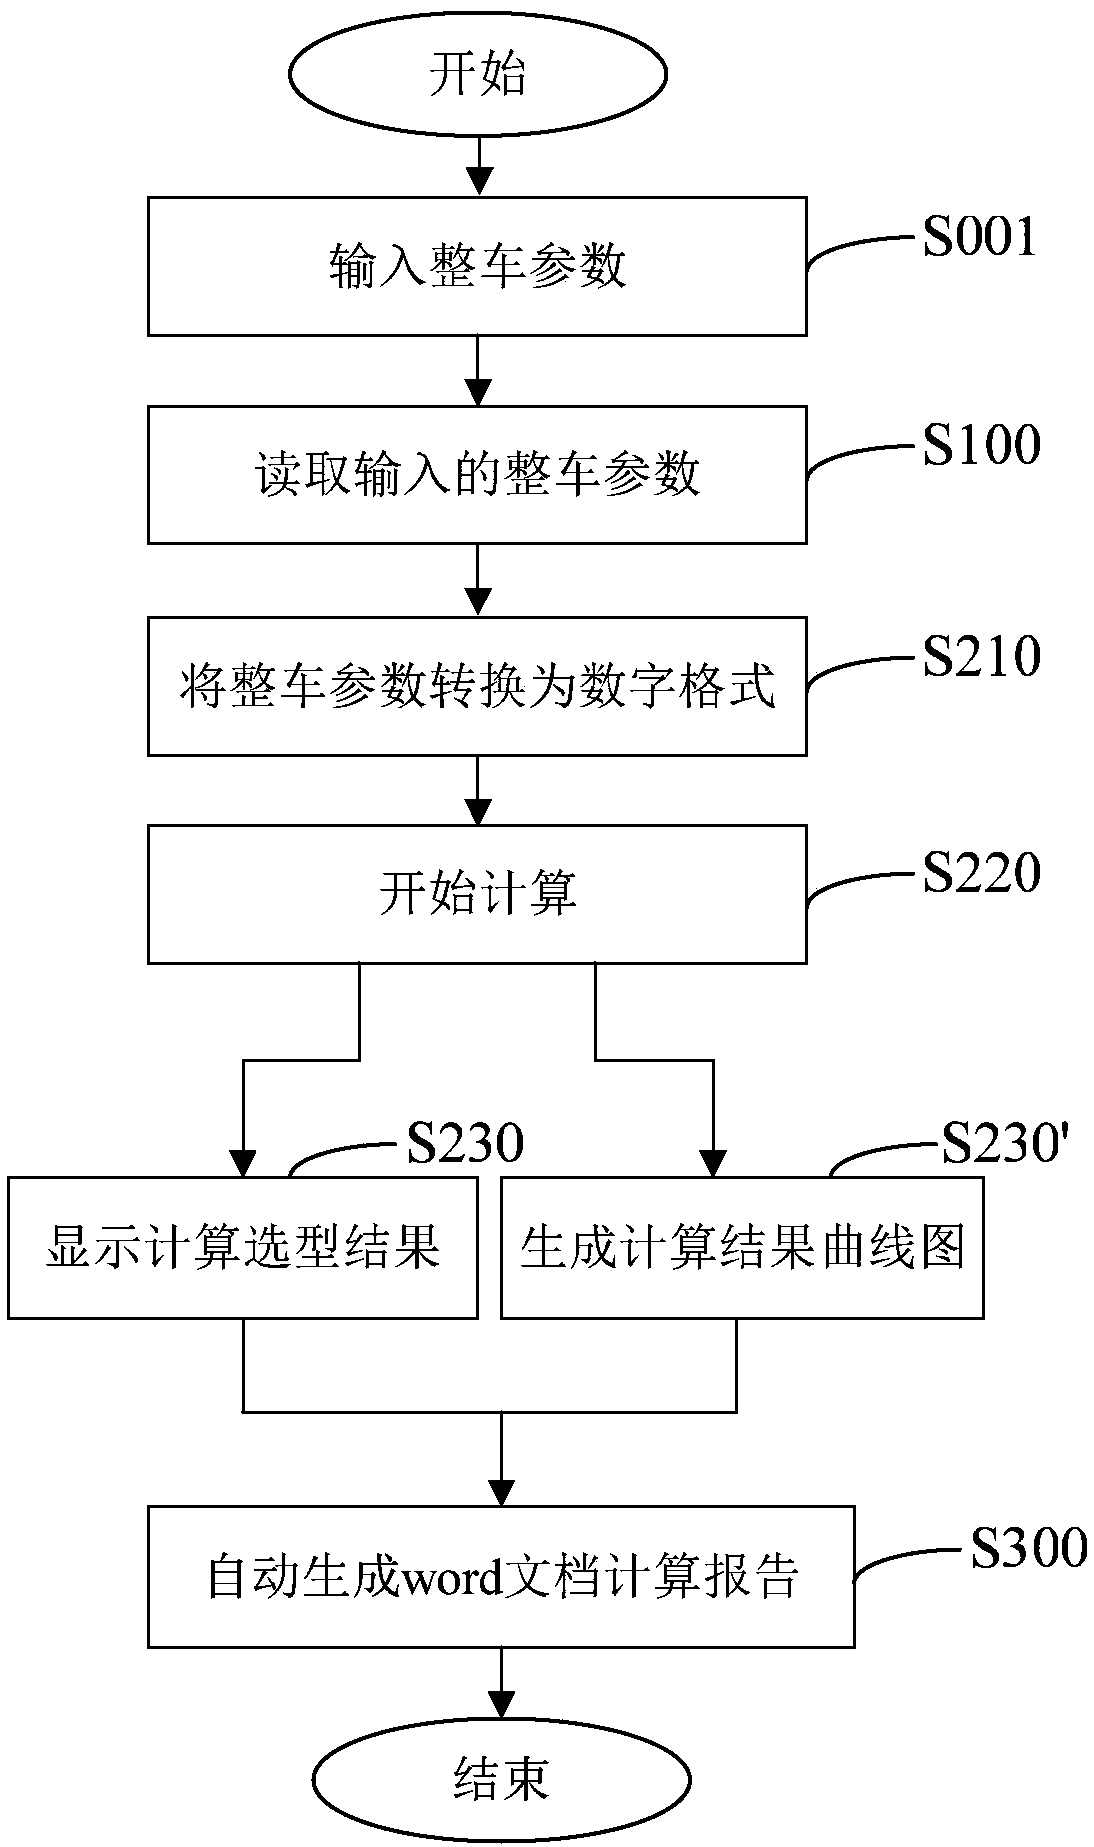 Method and system for motor type selection calculation and generation of calculation report